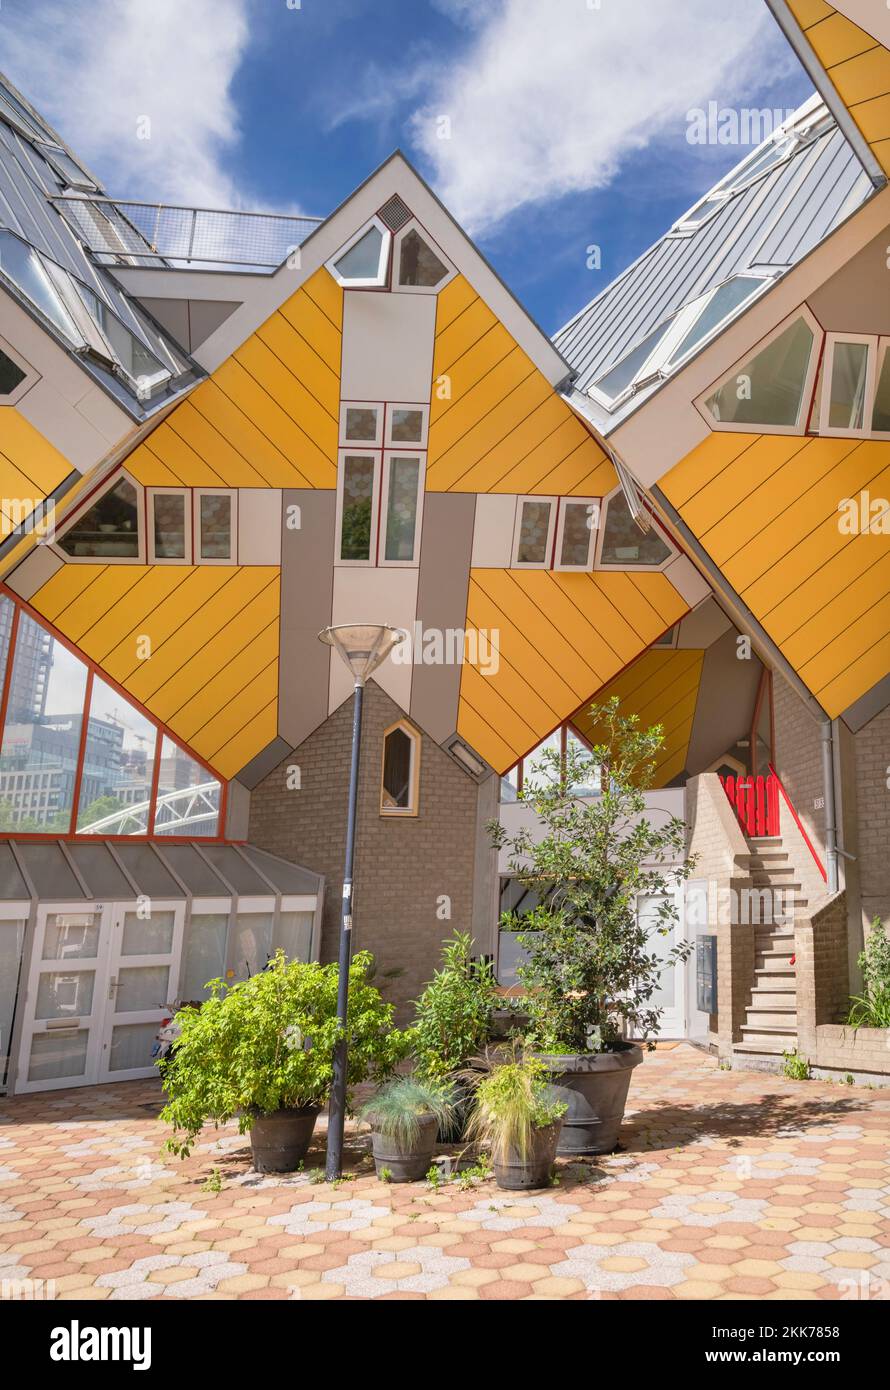 Holland, Rotterdam, The Cube Houses, an innovative housing development where each house is a cube tilted over by 45 degrees, designed by Dutch architect Piet Blom and bult between 1977 and 1984, a typical cube house in the landscaped central courtyard. Stock Photo